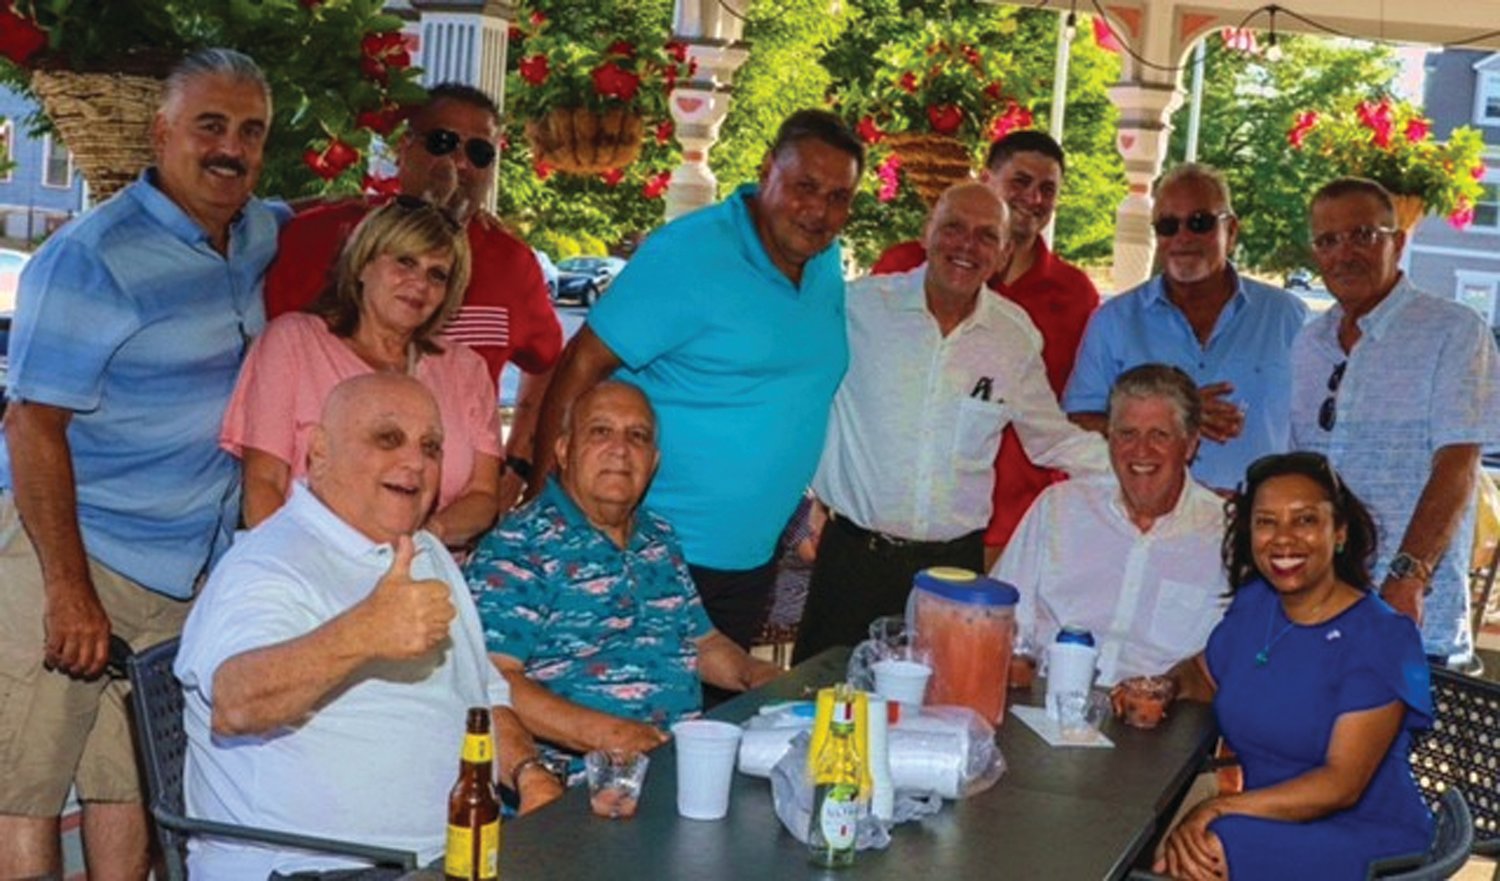 LOCAL LINK: Many Johnston residents like Richard DelFino III and Jr., Stephen Mallane, John D’Errico, Don Oliver, Mike Maddalena and Paul Giarrusso join Gov. Dan McKee and Lt. Gov. Sabina Matos during last Friday night’s fun and food-filled event.